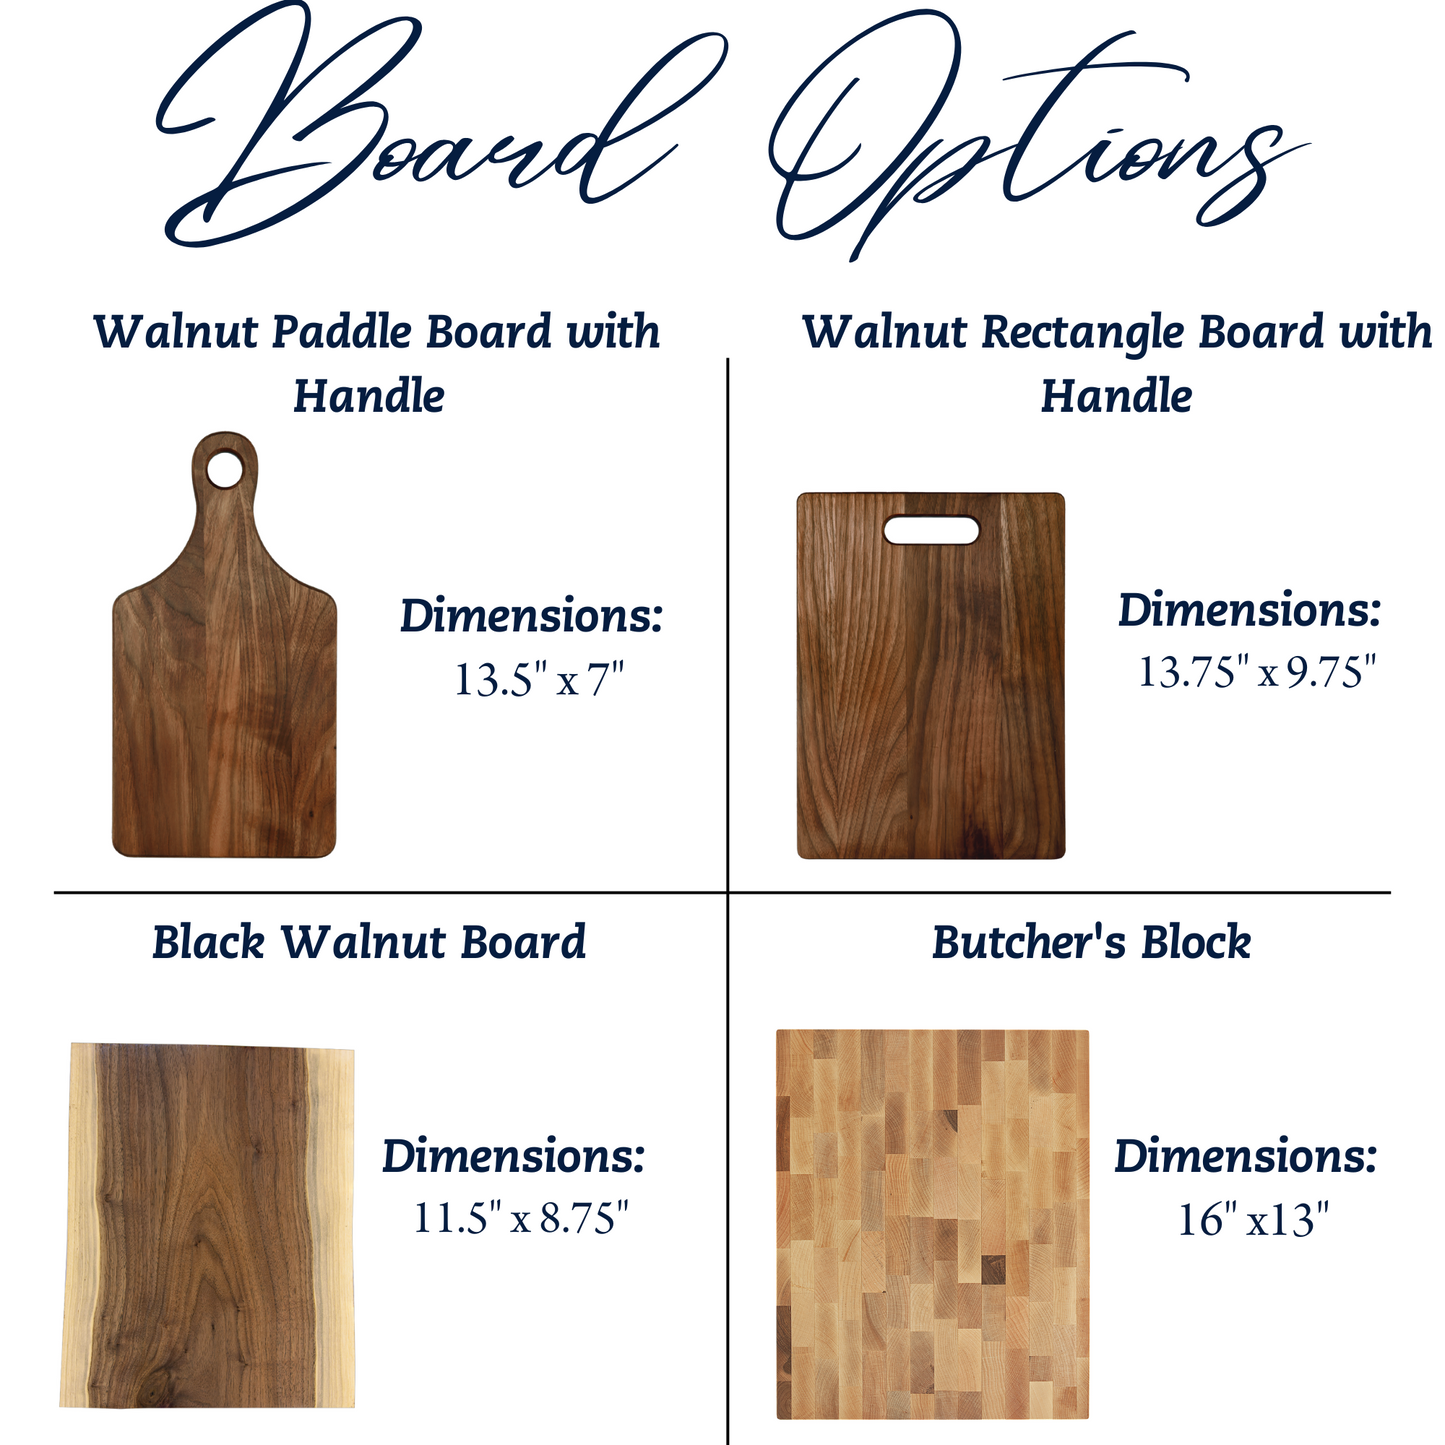 Bamboo and Wood Cutting Boards